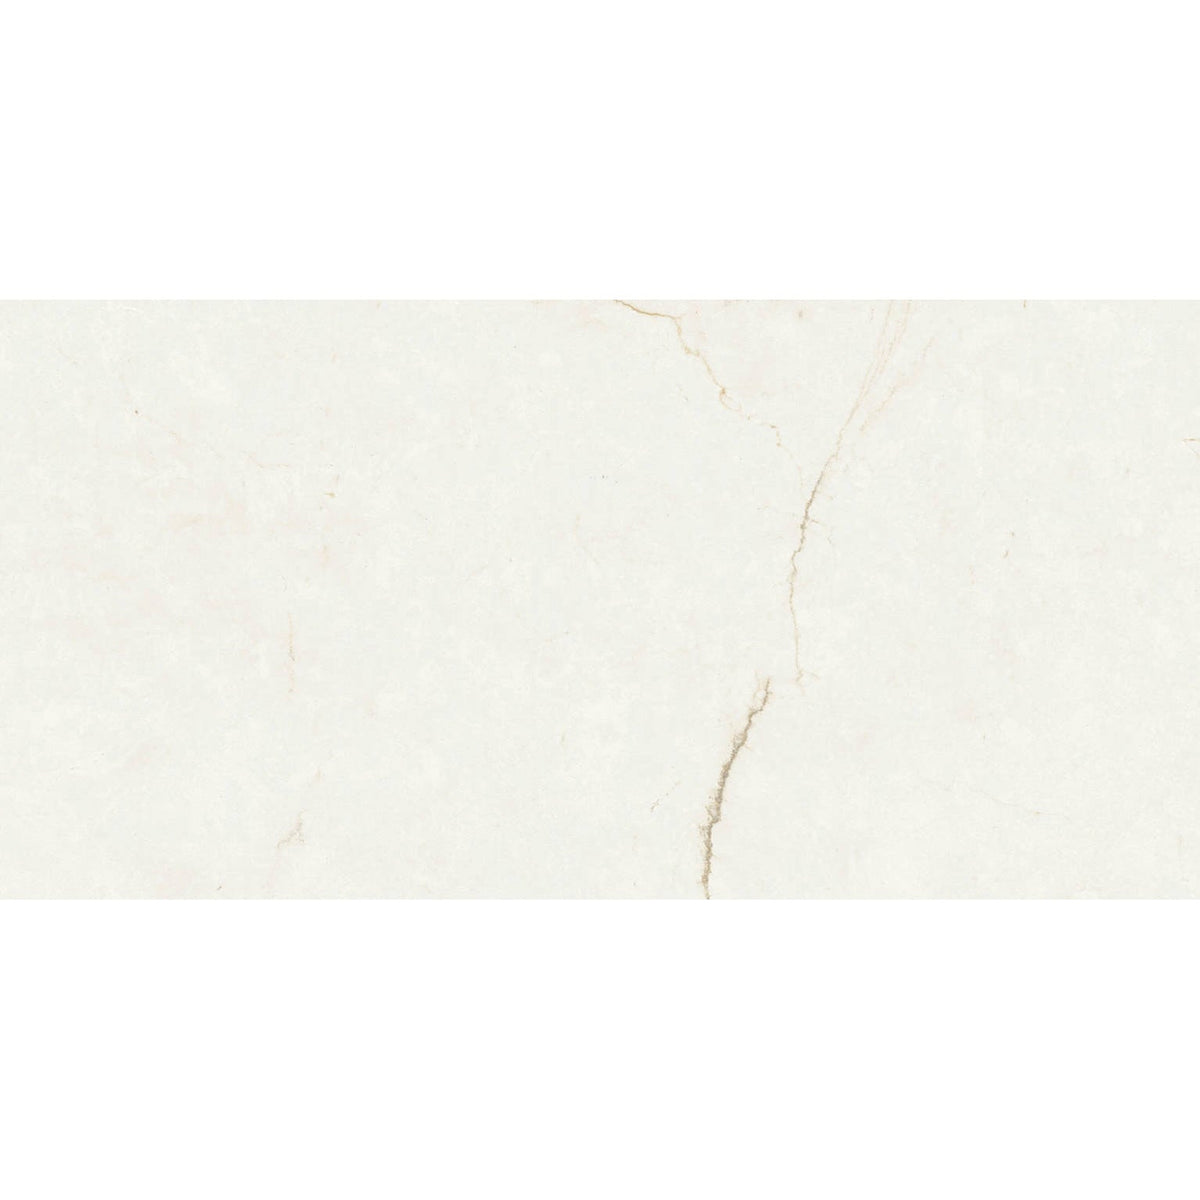 General Ceramic - Marmo Series 12 in. x 24 in. Matte Porcelain Tile - Marmo Marfil